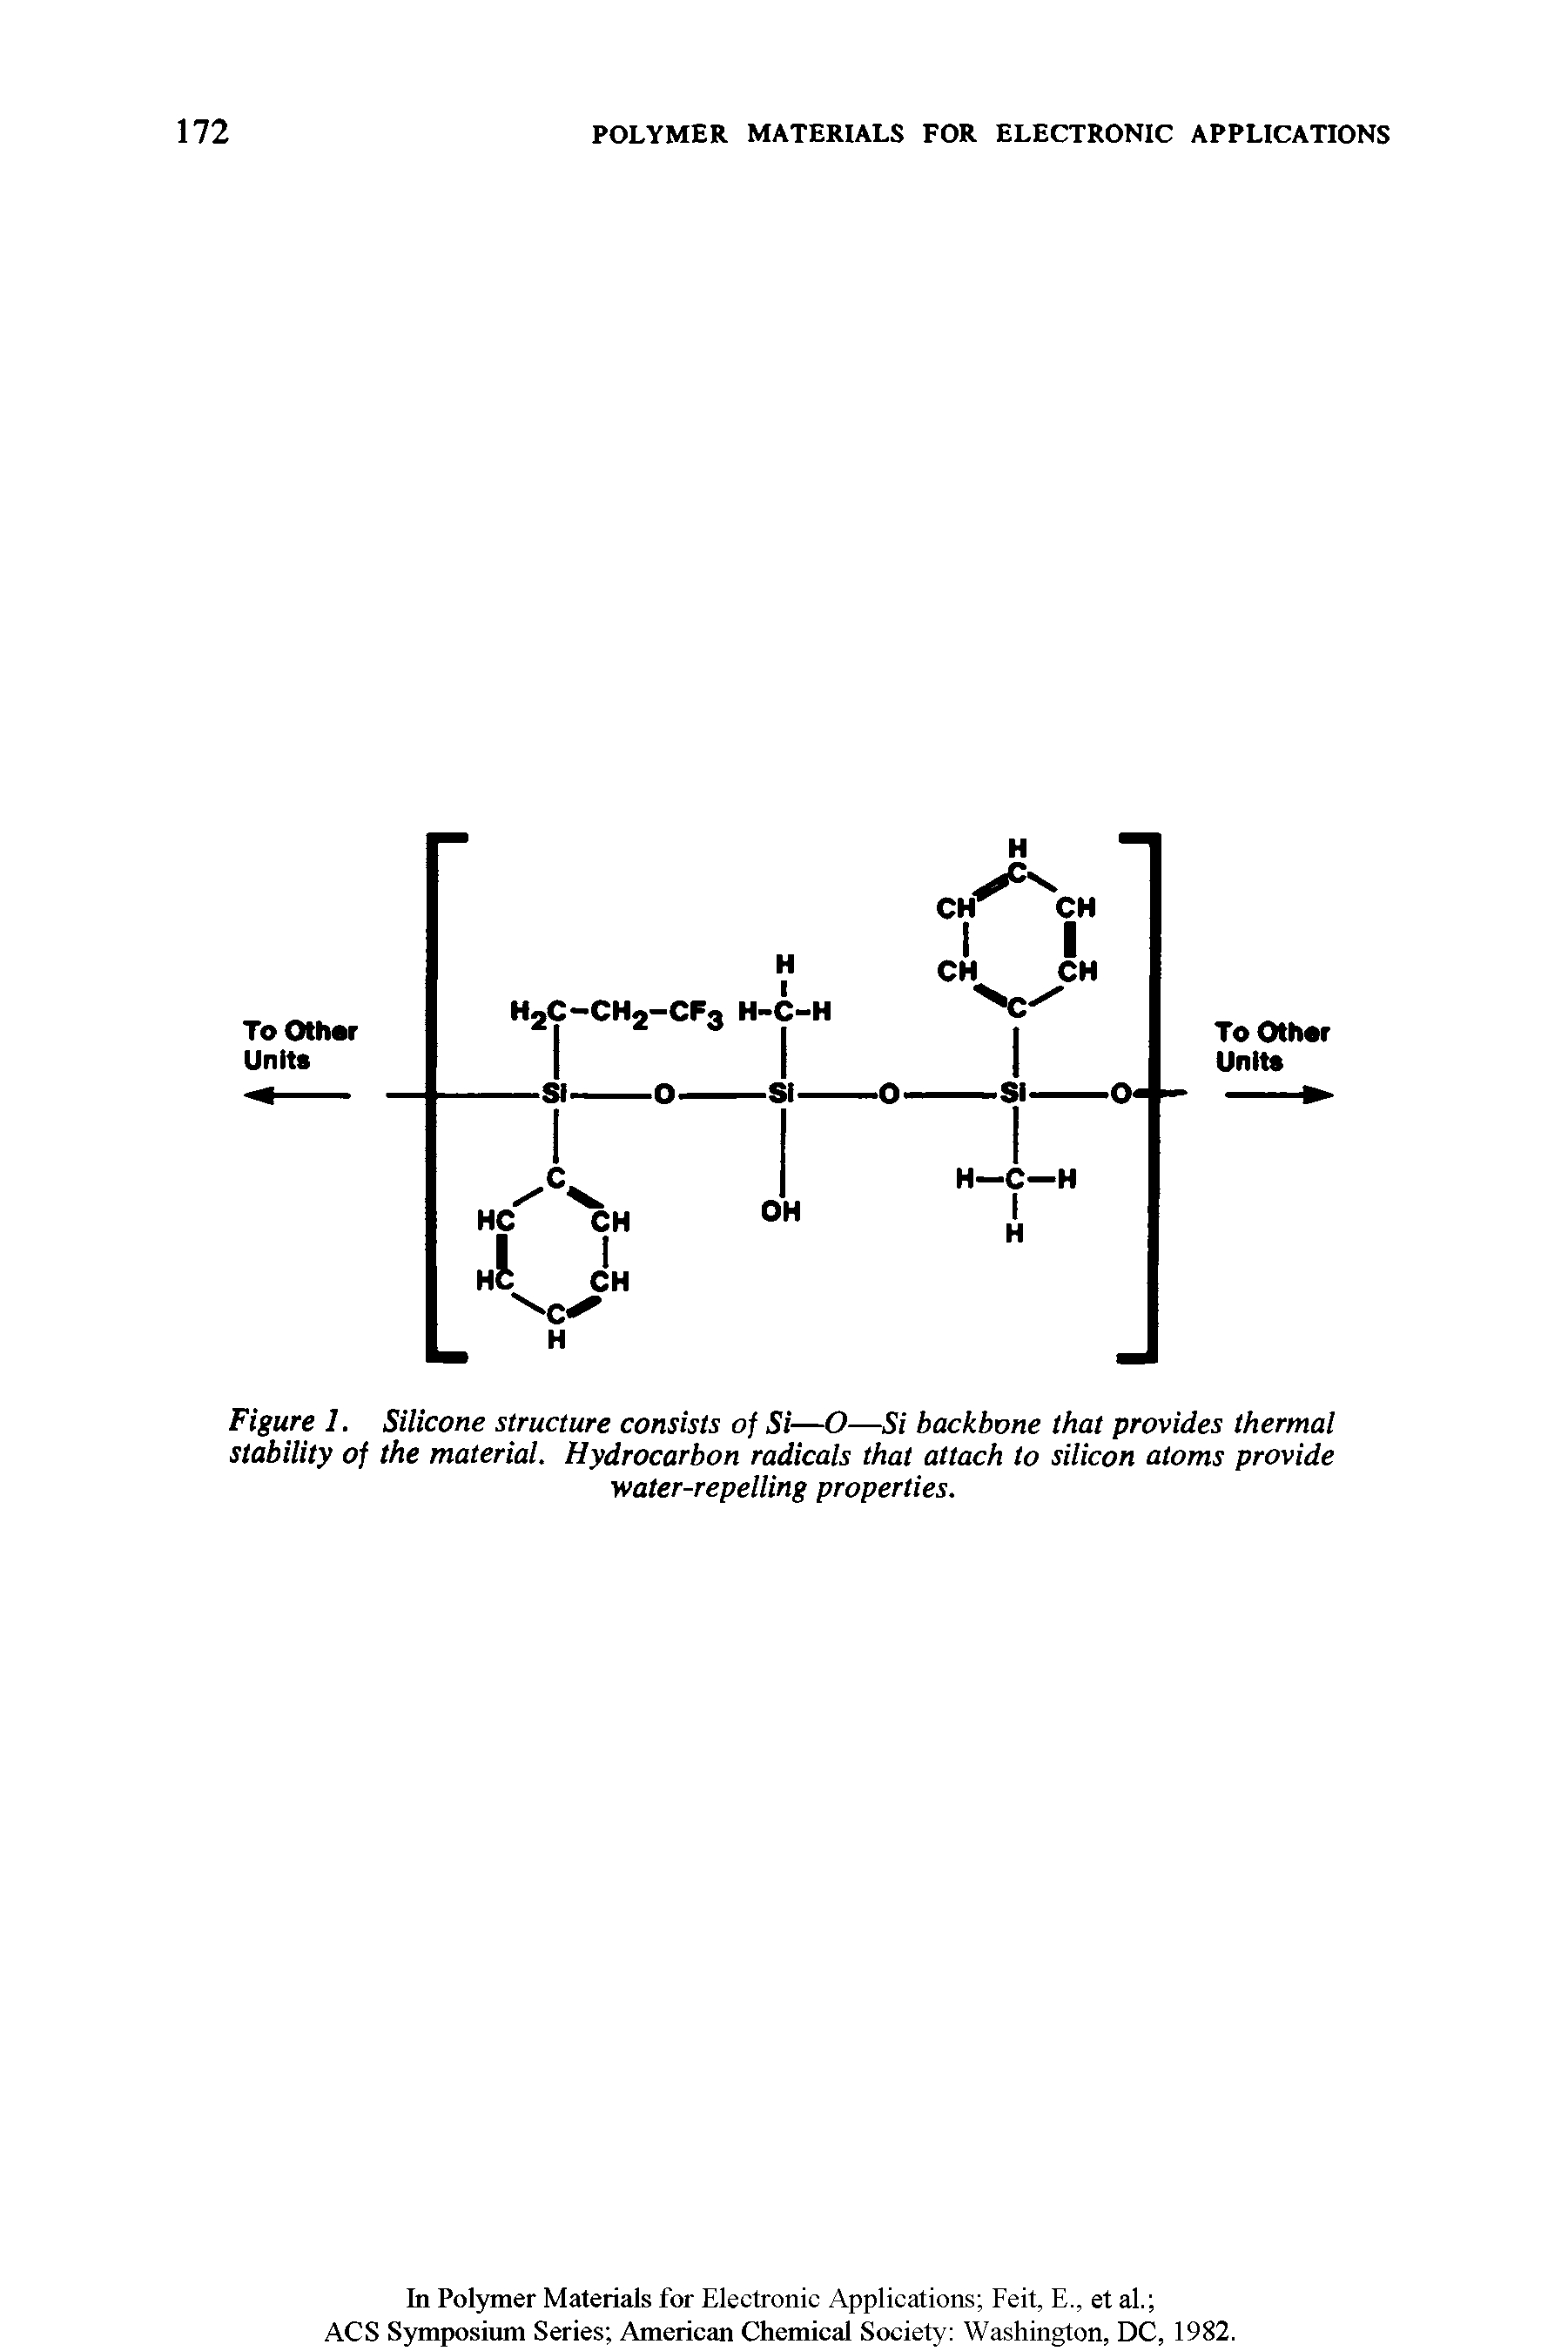 Figure 1. Silicone structure consists of Si—O—Si backbone that provides thermal stability of the material. Hydrocarbon radicals that attach to silicon atoms provide water-repelling properties.